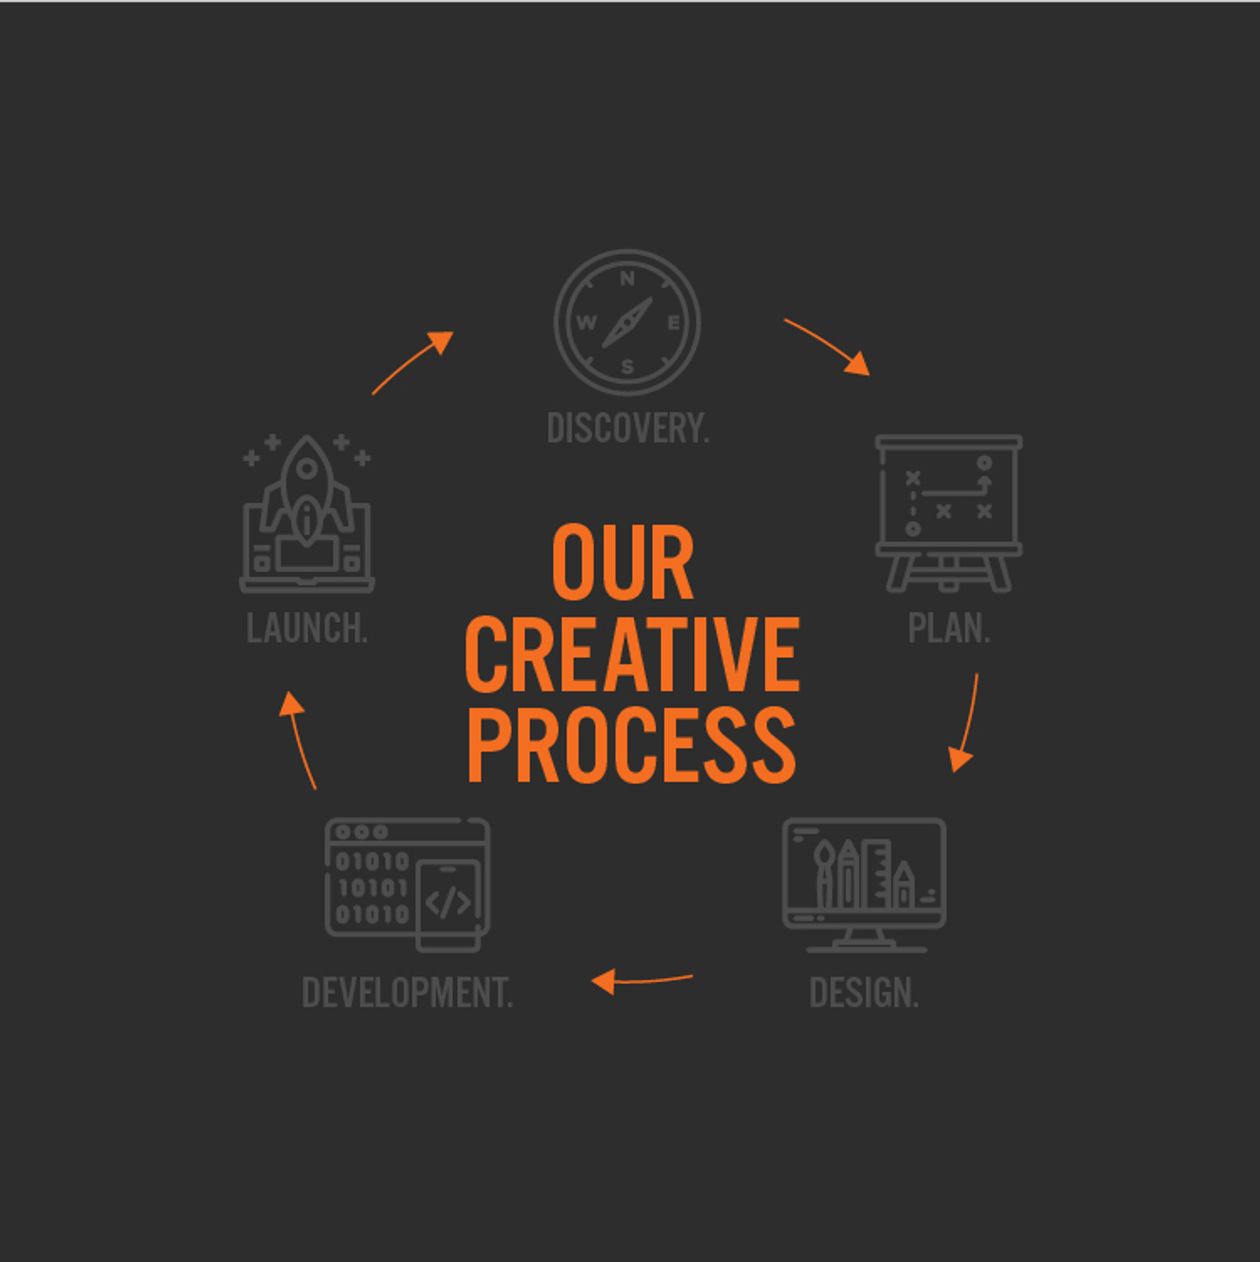 What to Expect from Our Creative Process